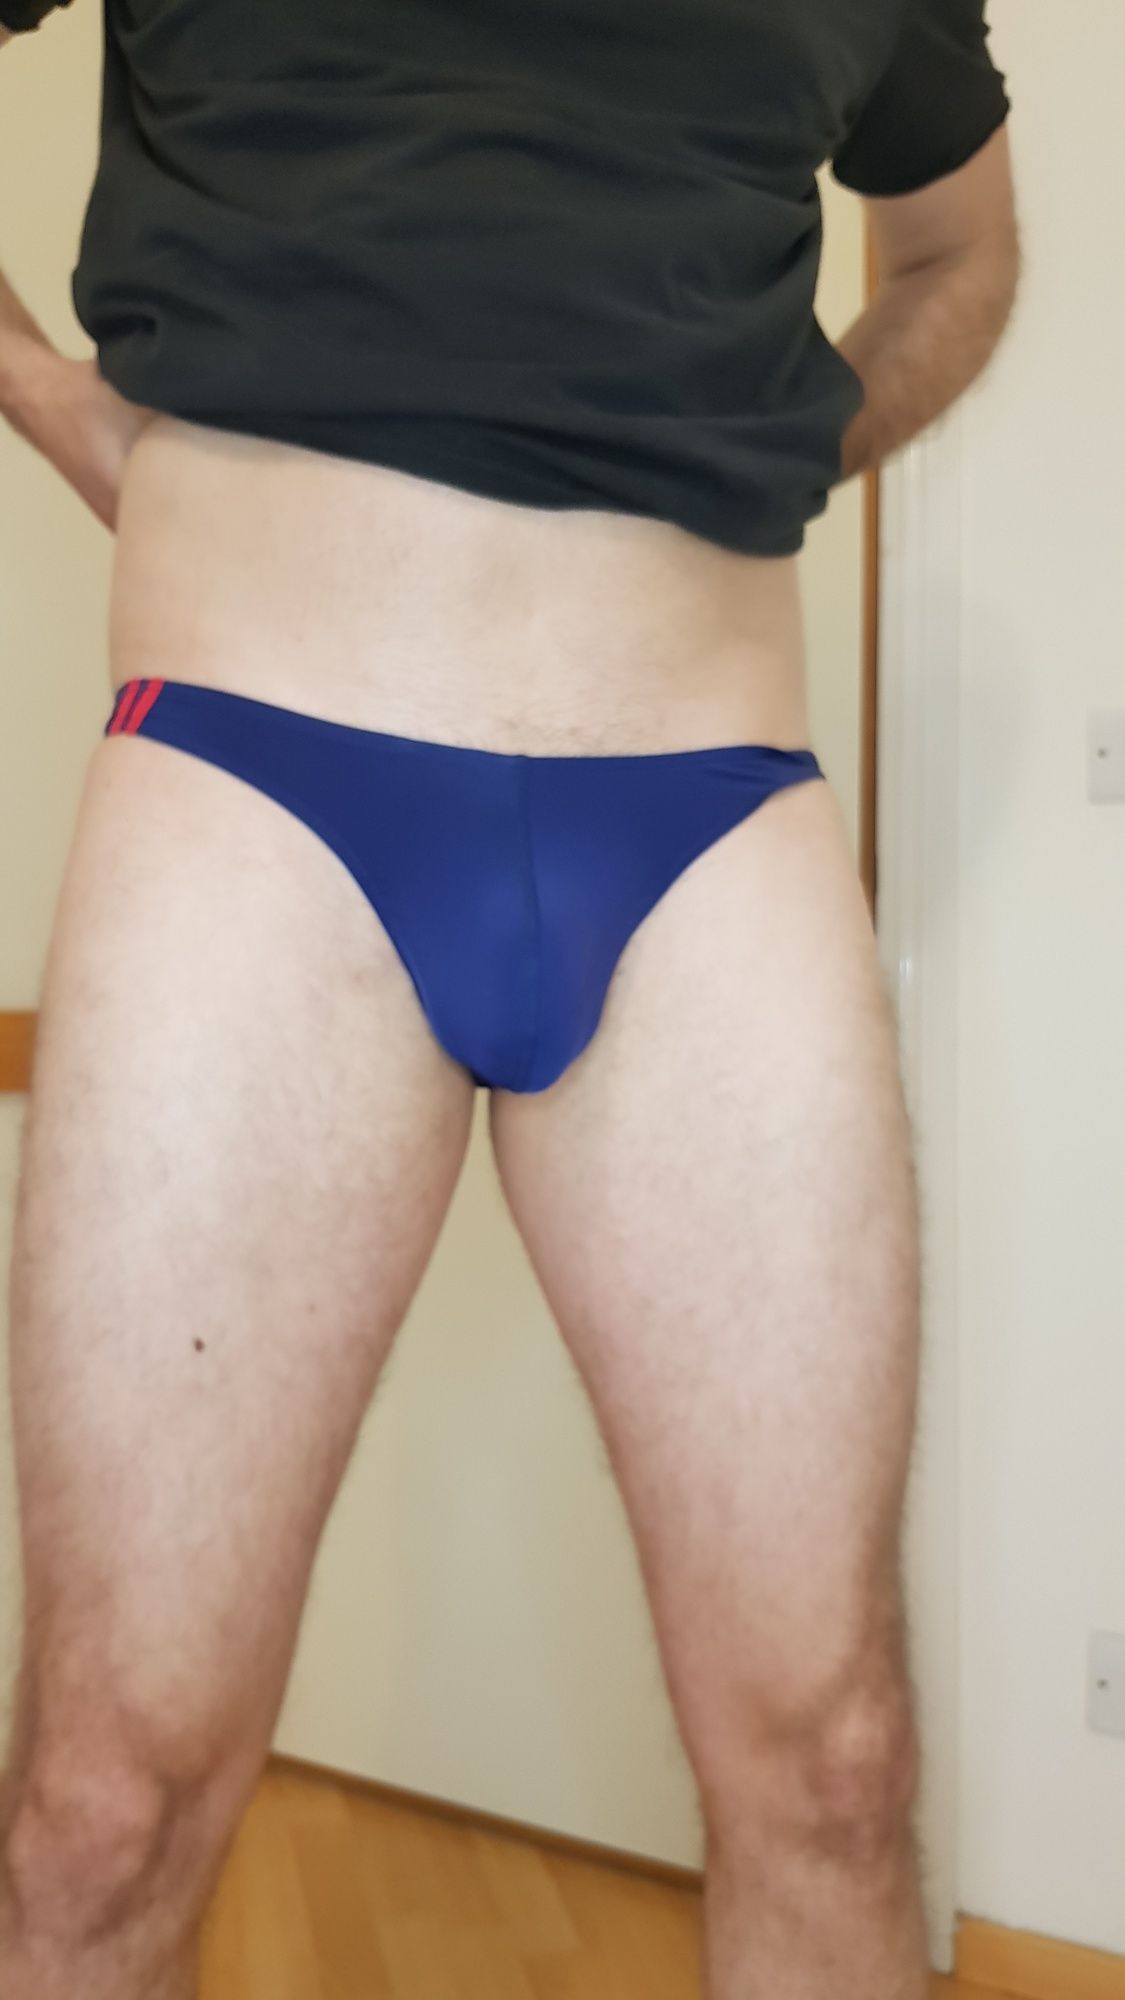 Should i go to pool in this speedos? #3